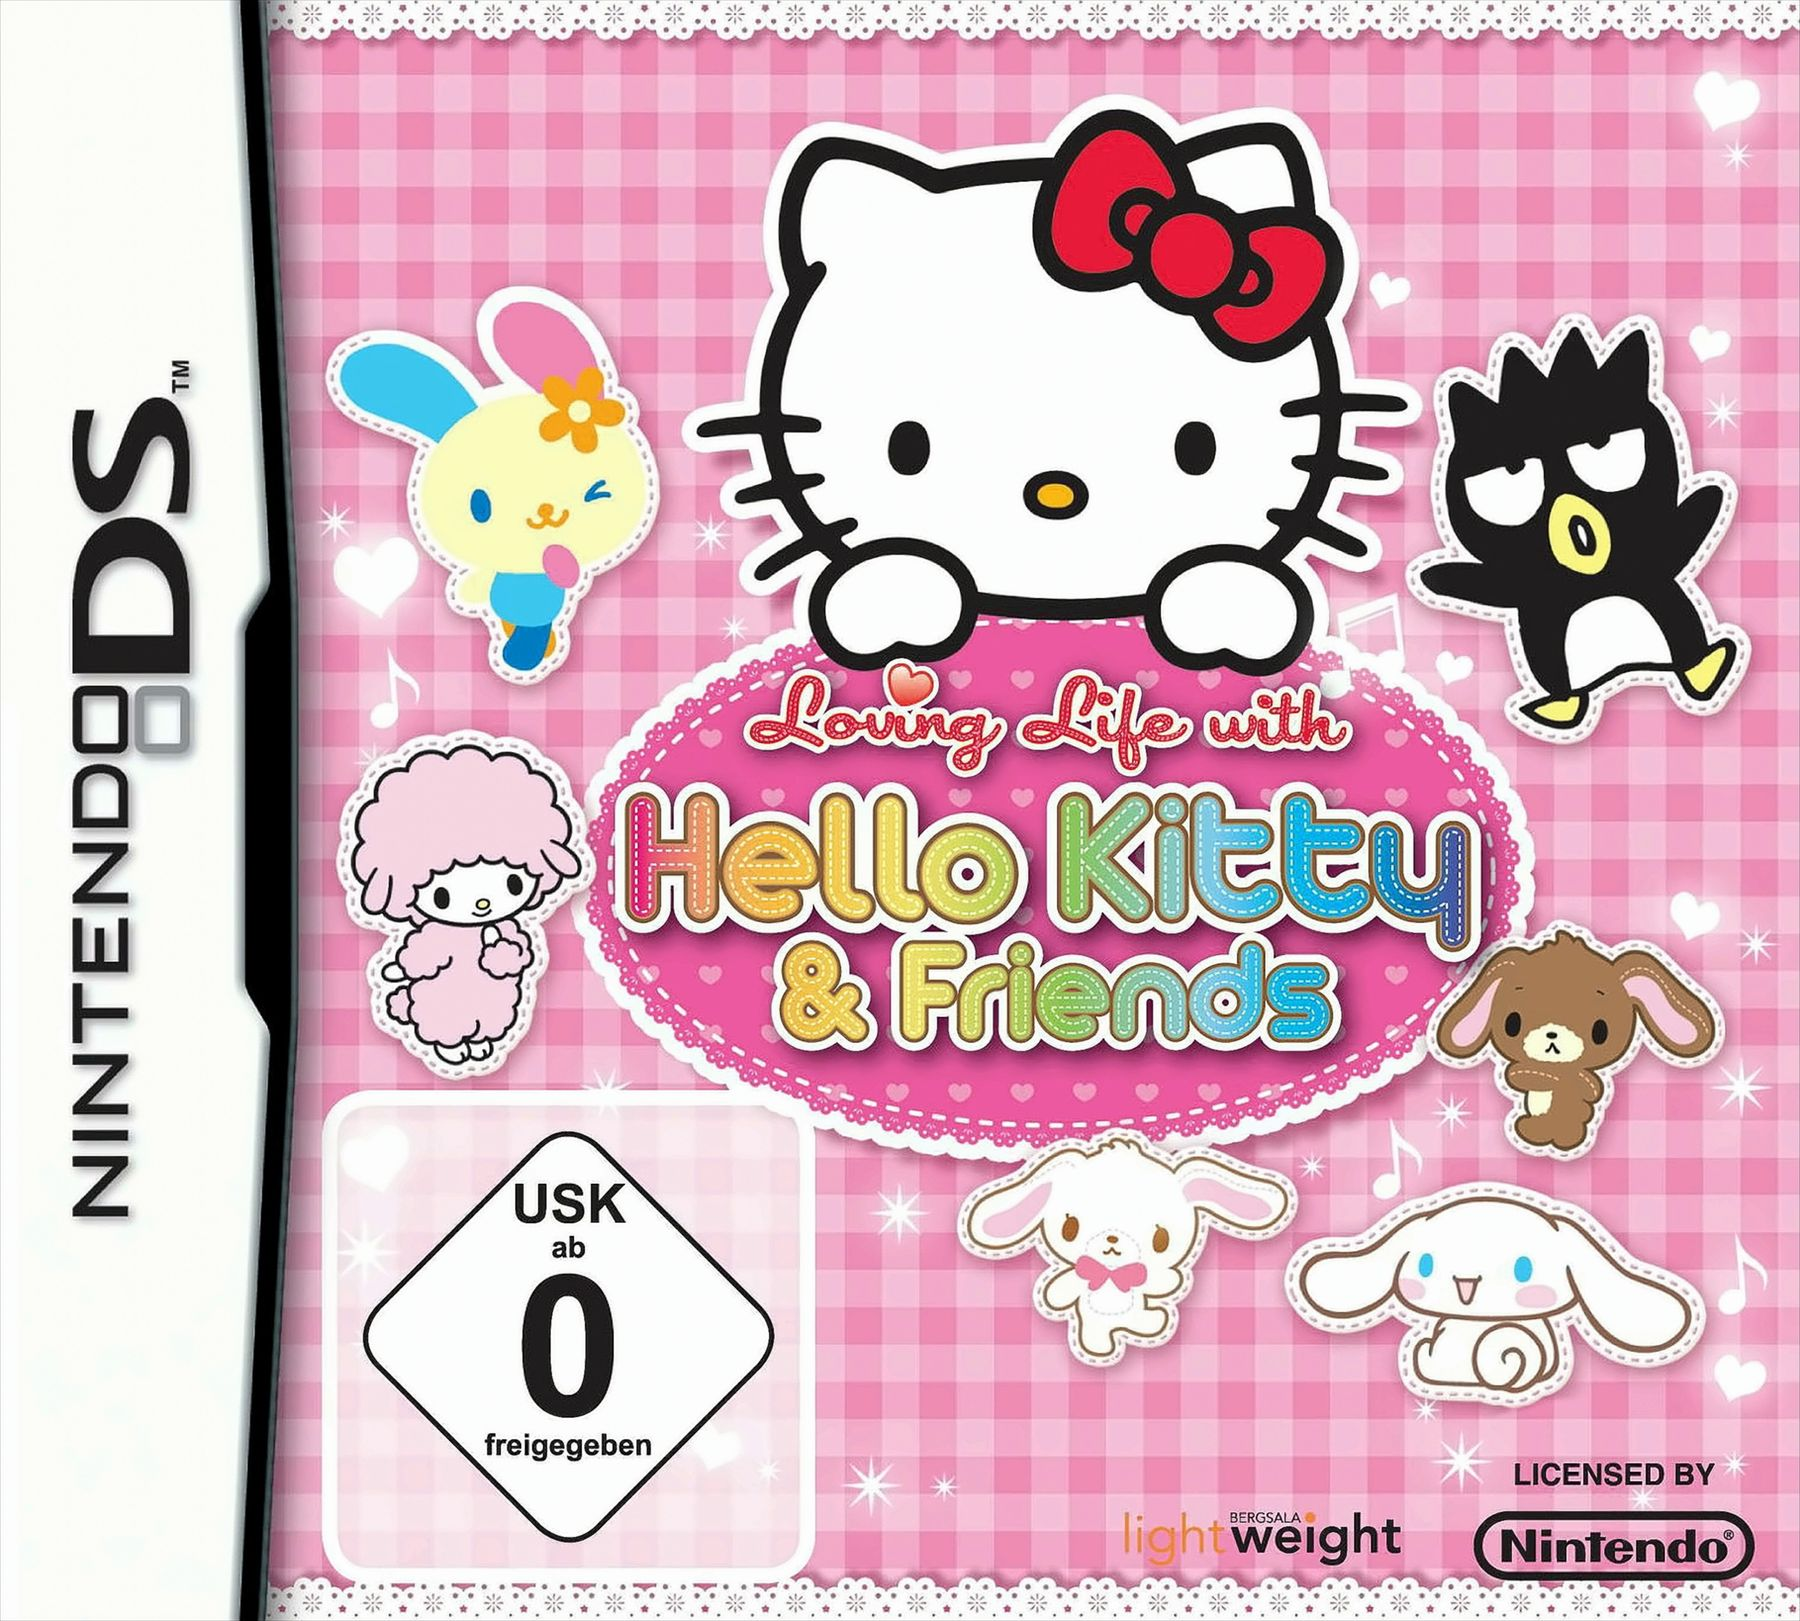 Loving Life & With DS] Friends [Nintendo Kitty Hello 